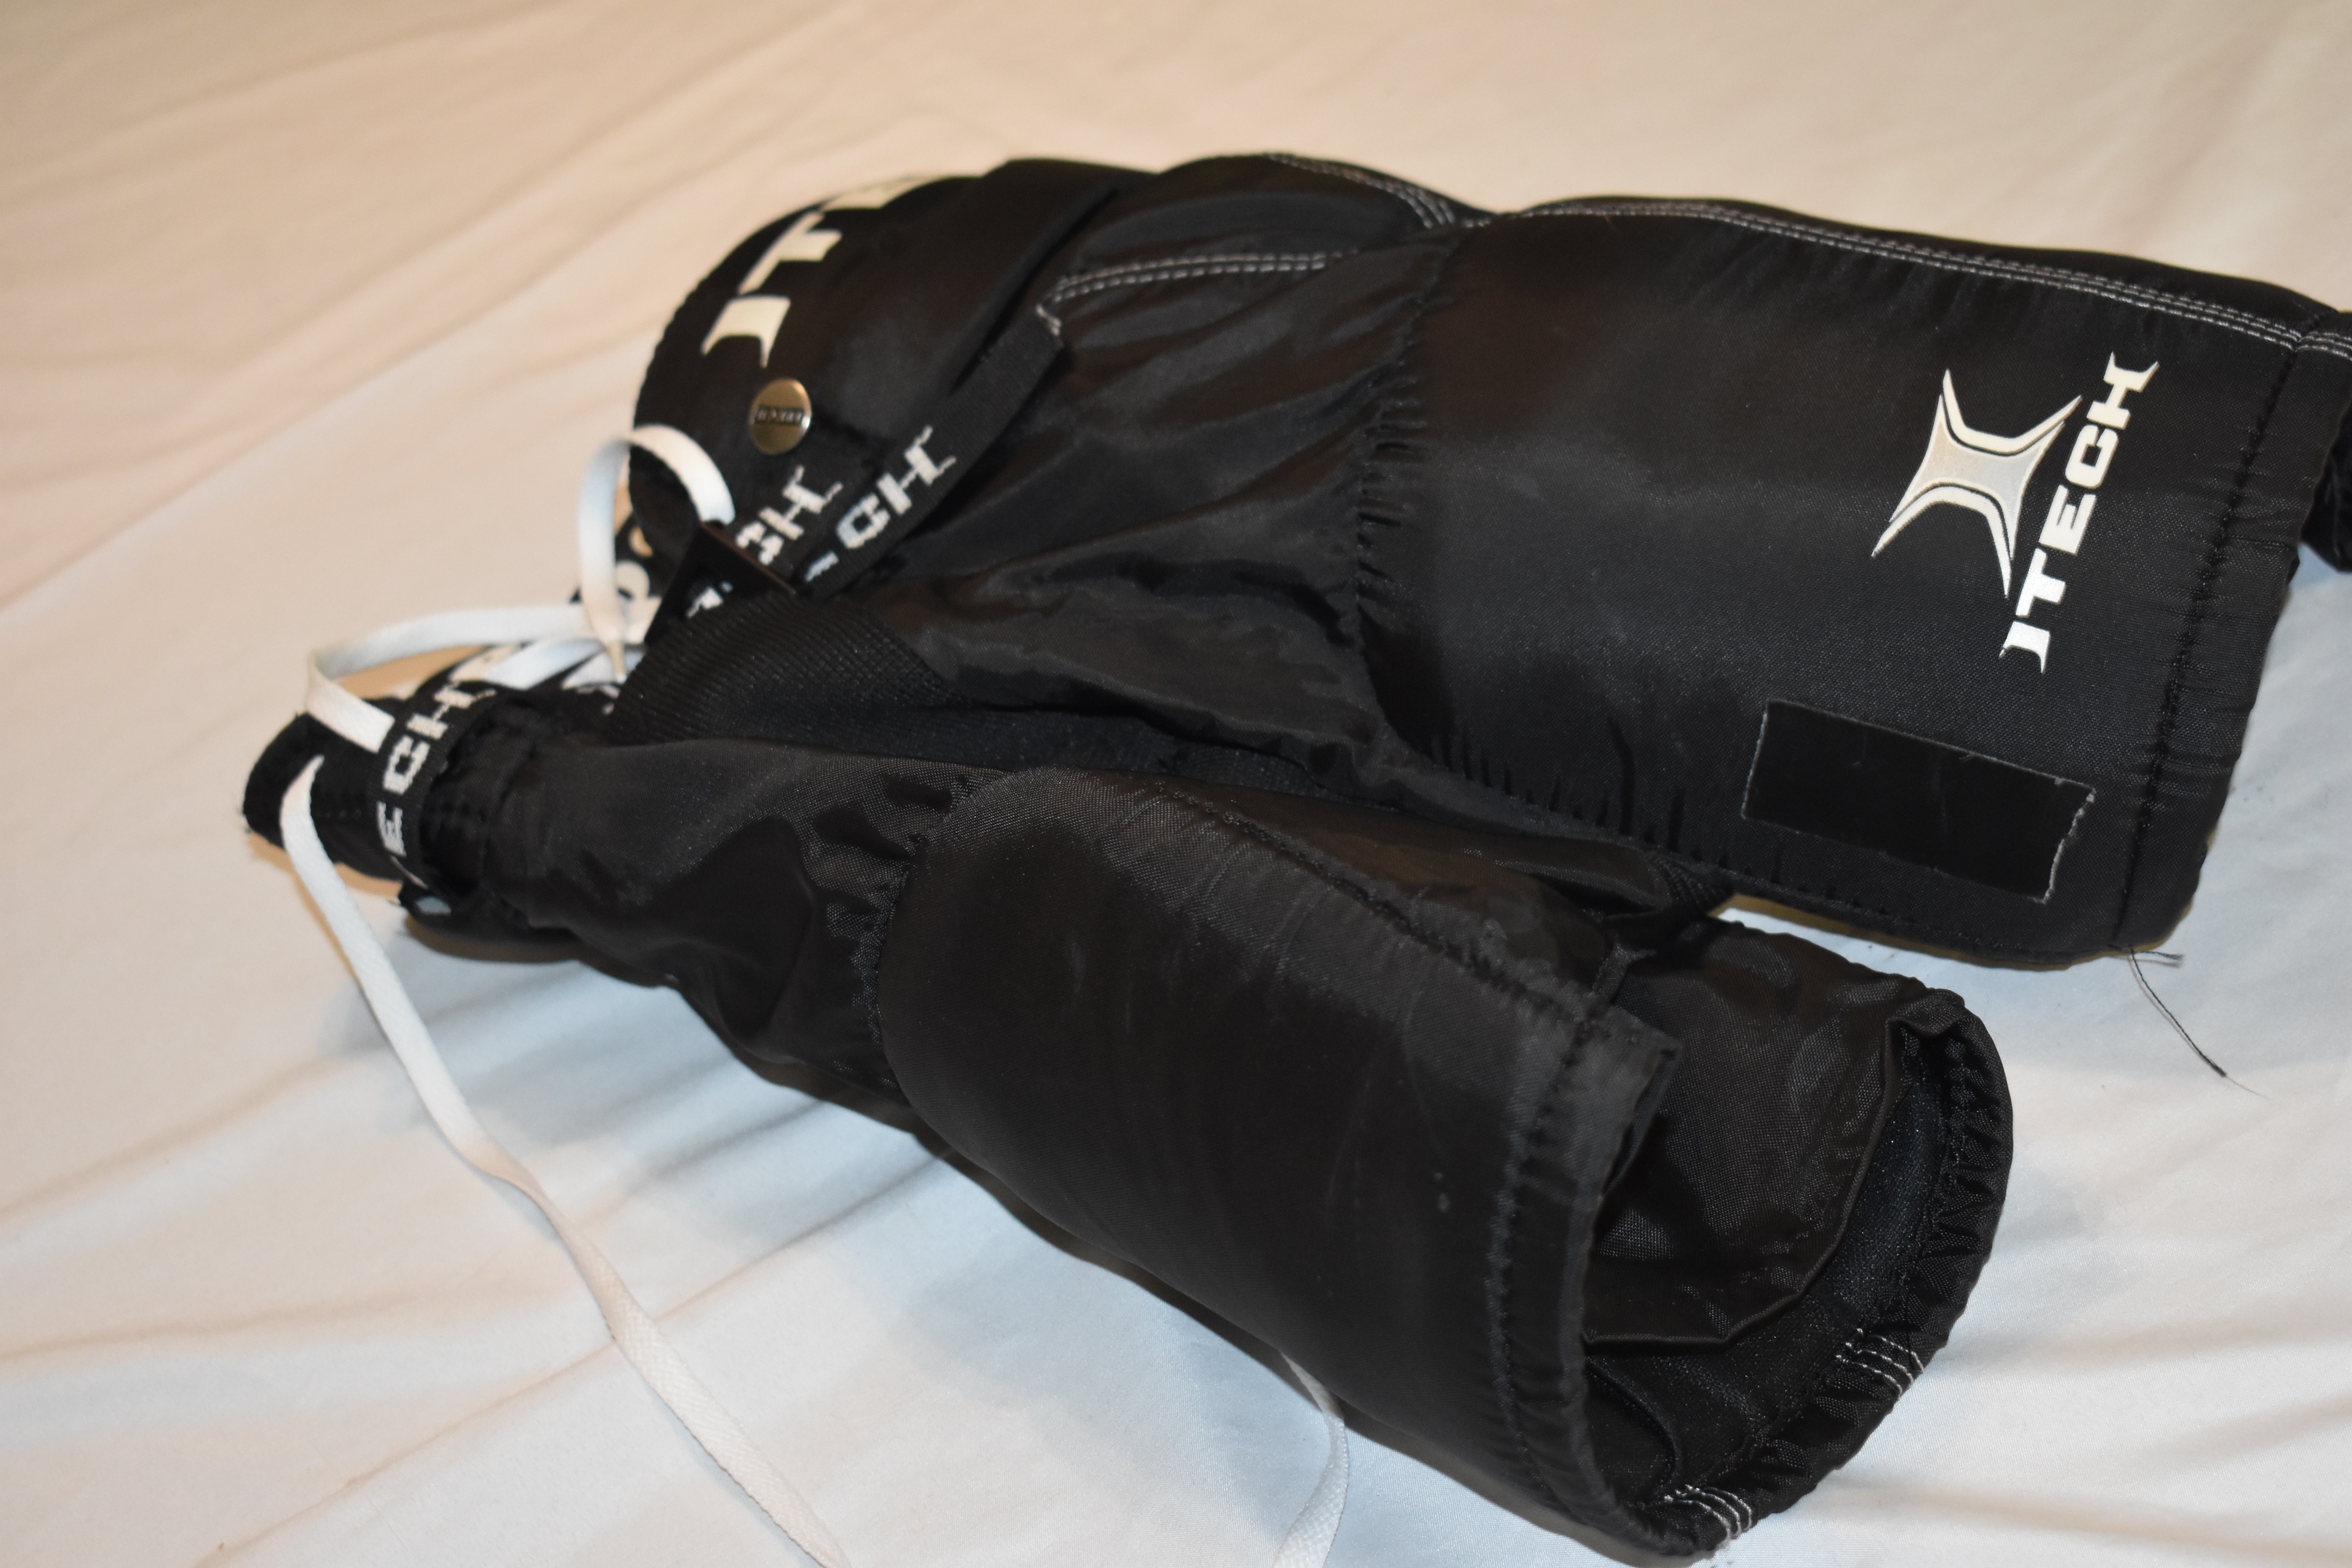 Itech HP 1000 Hockey Pants, Black, Small (20-22) - Great Condition!